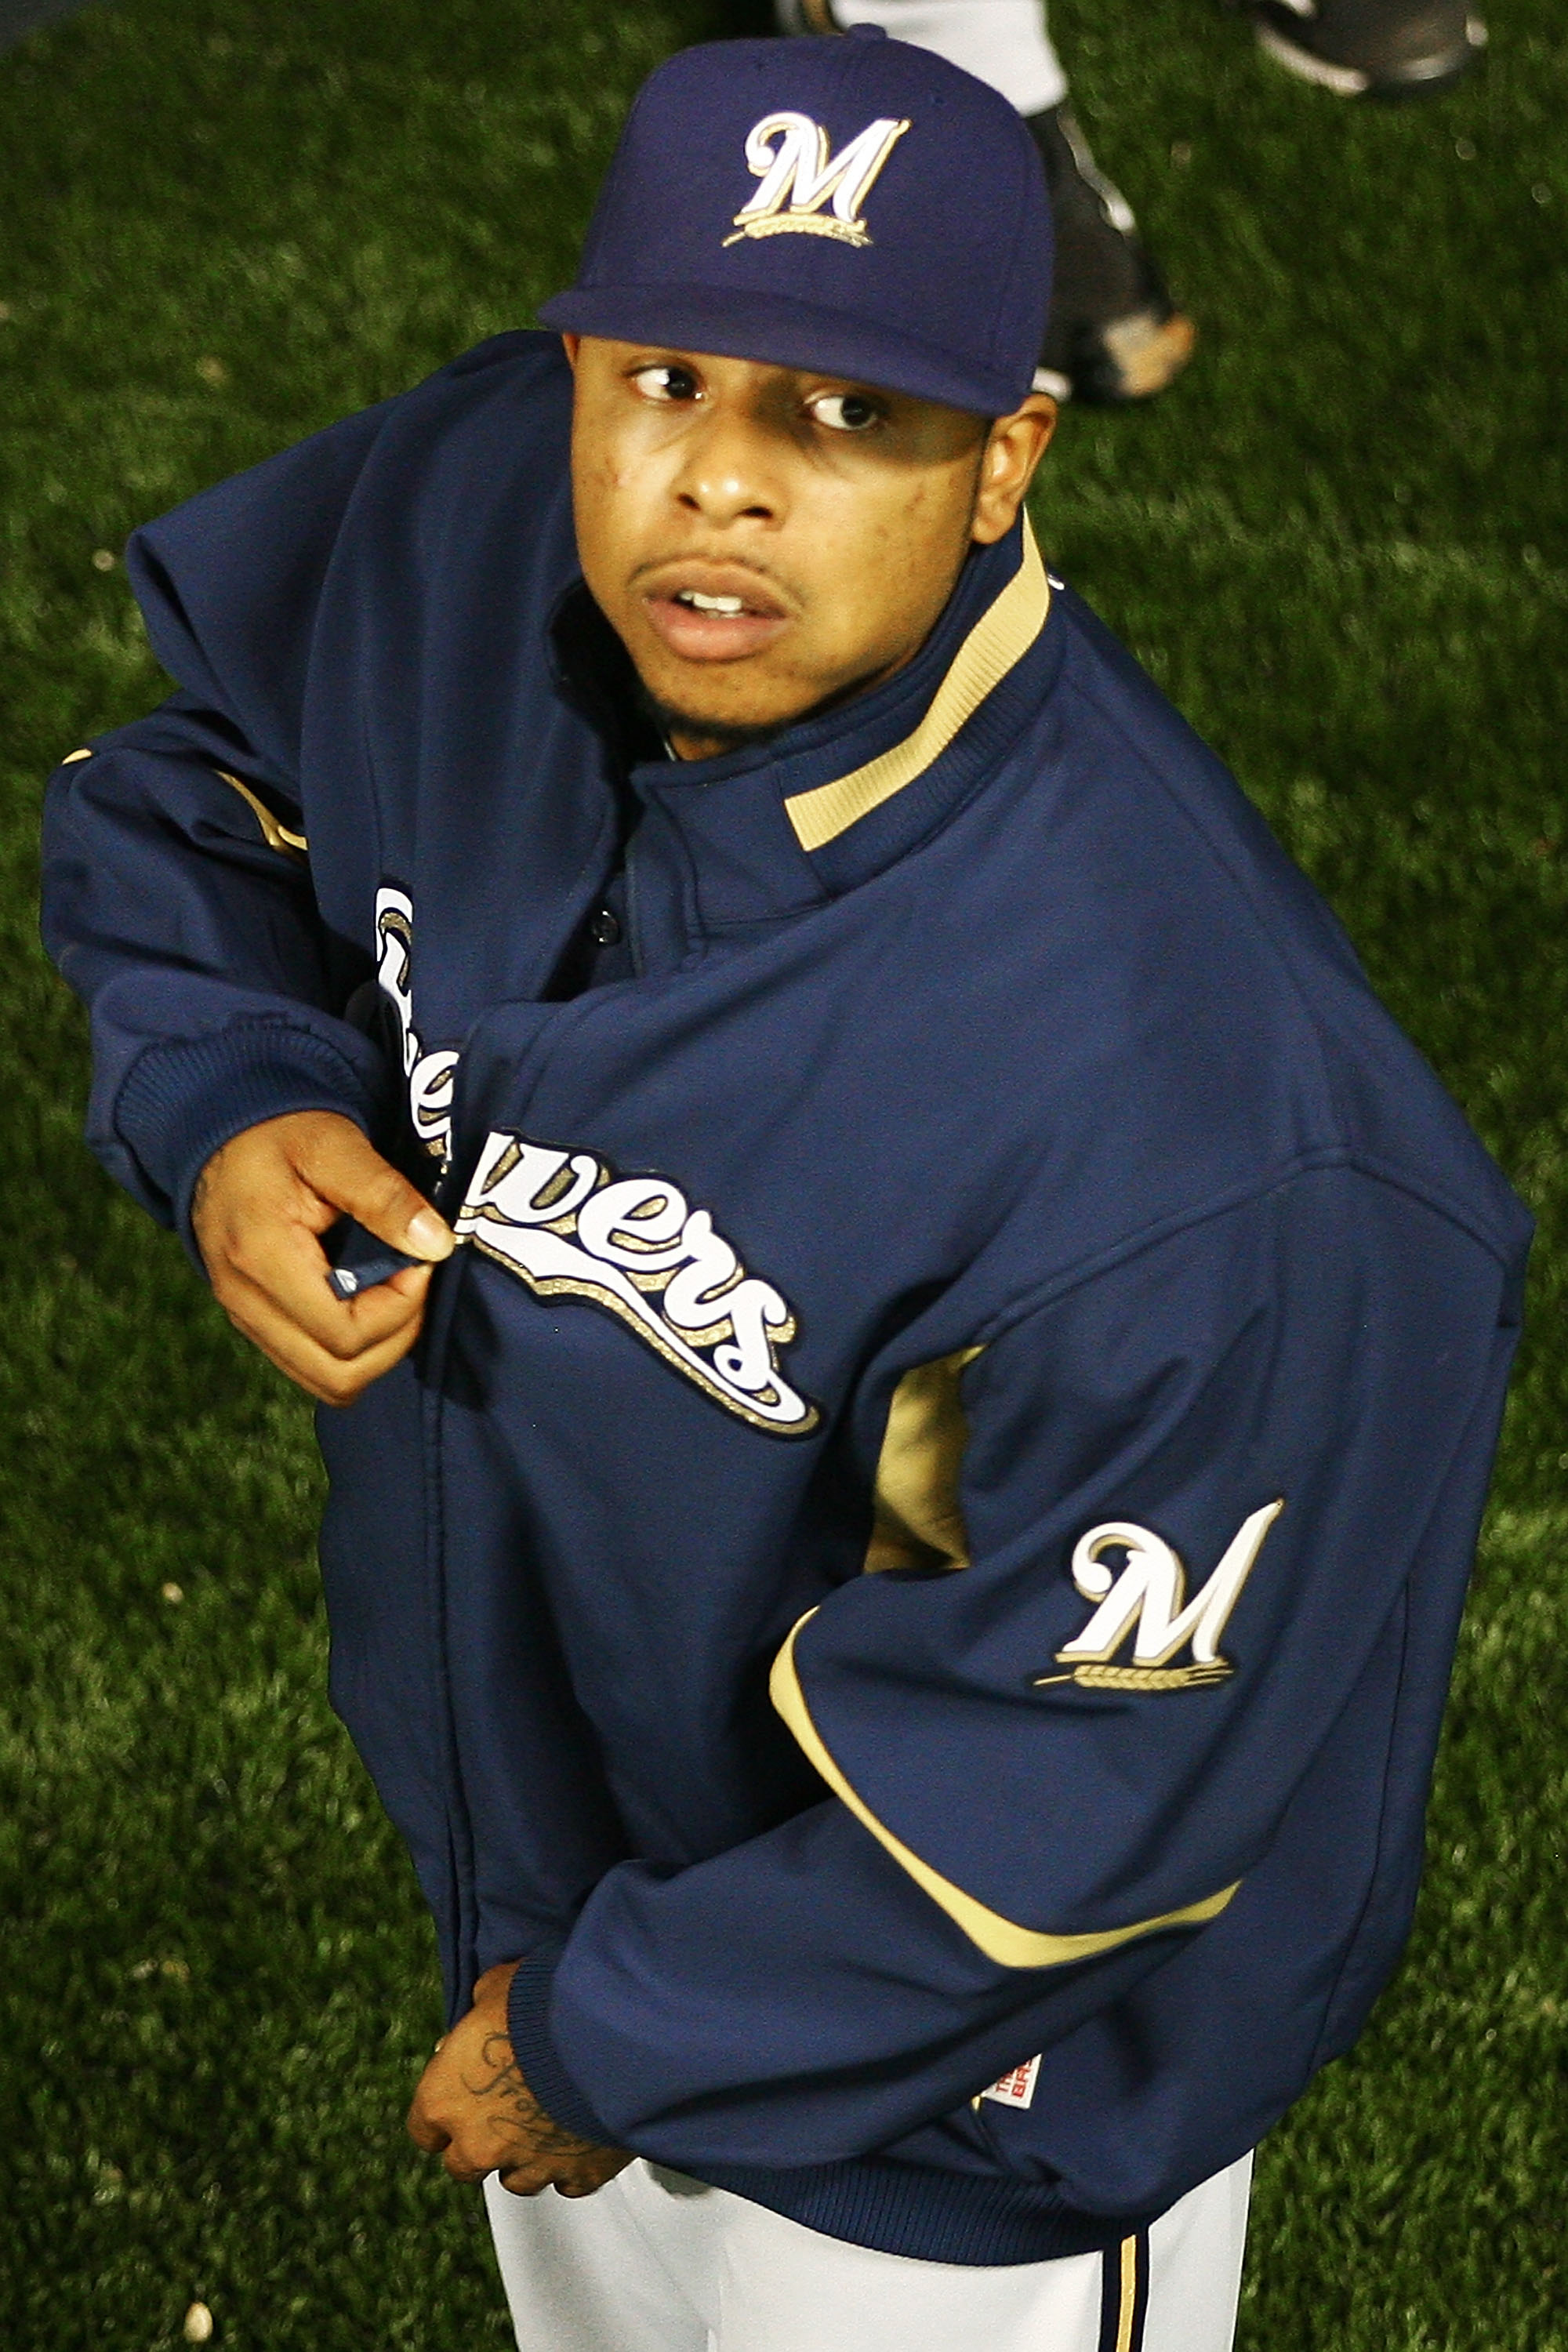 NEW YORK - SEPTEMBER 30:  Jeremy Jeffress #41 of the Milwaukee Brewers watches their game against the New York Mets on September 30, 2010 at Citi Field in the Flushing neighborhood of the Queens borough of New York City. The Brewers defeated the Mets 9-2.